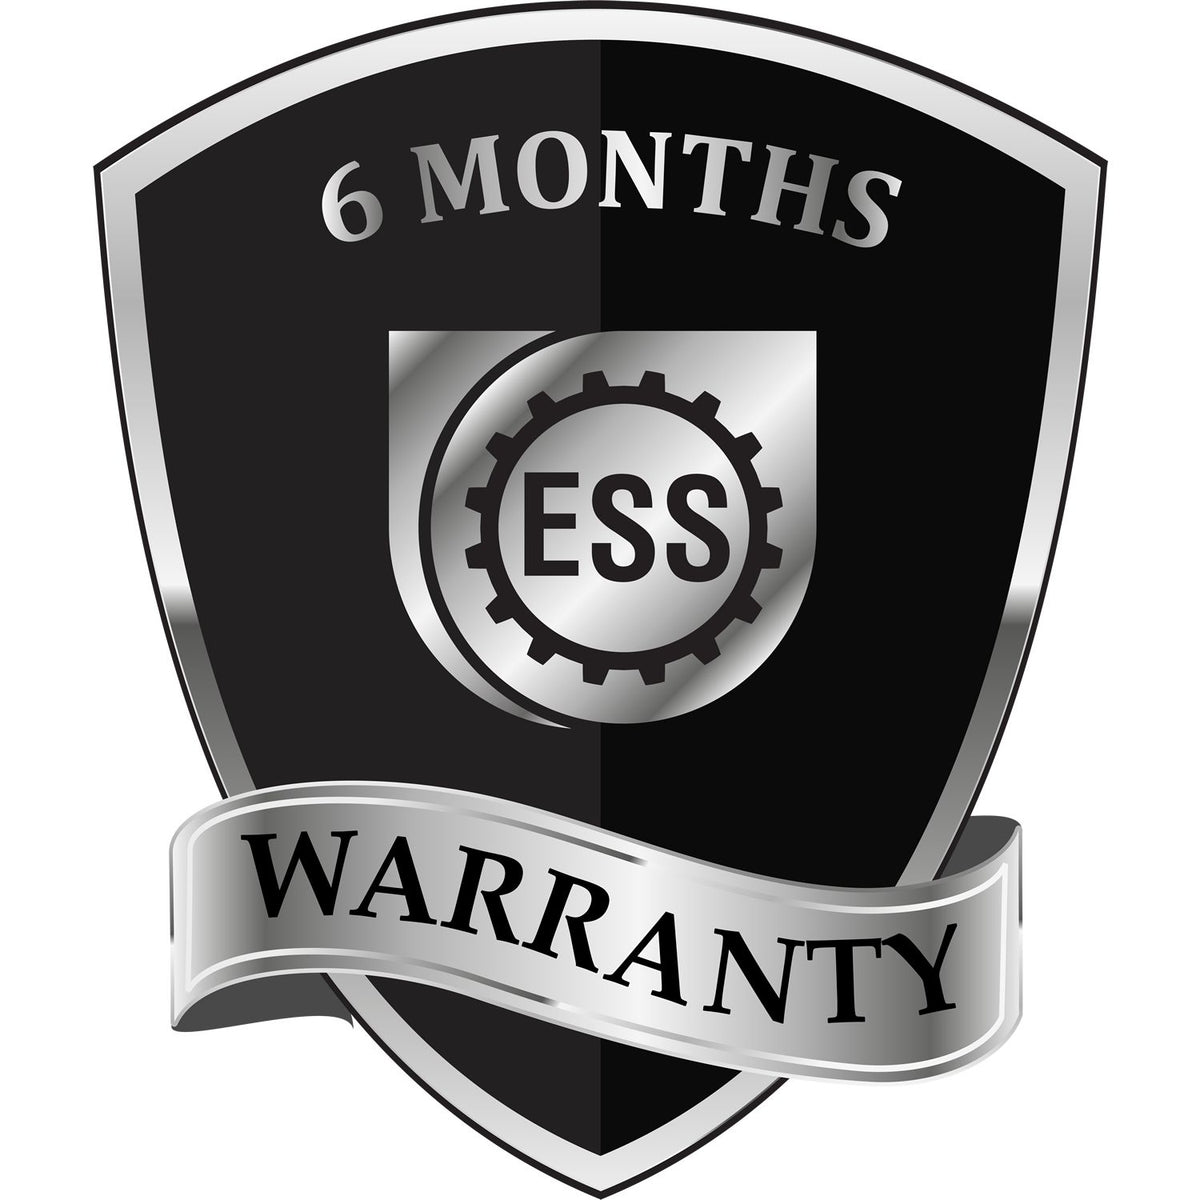 A black and silver badge or emblem showing warranty information for the Self-Inking Kansas Geologist Stamp